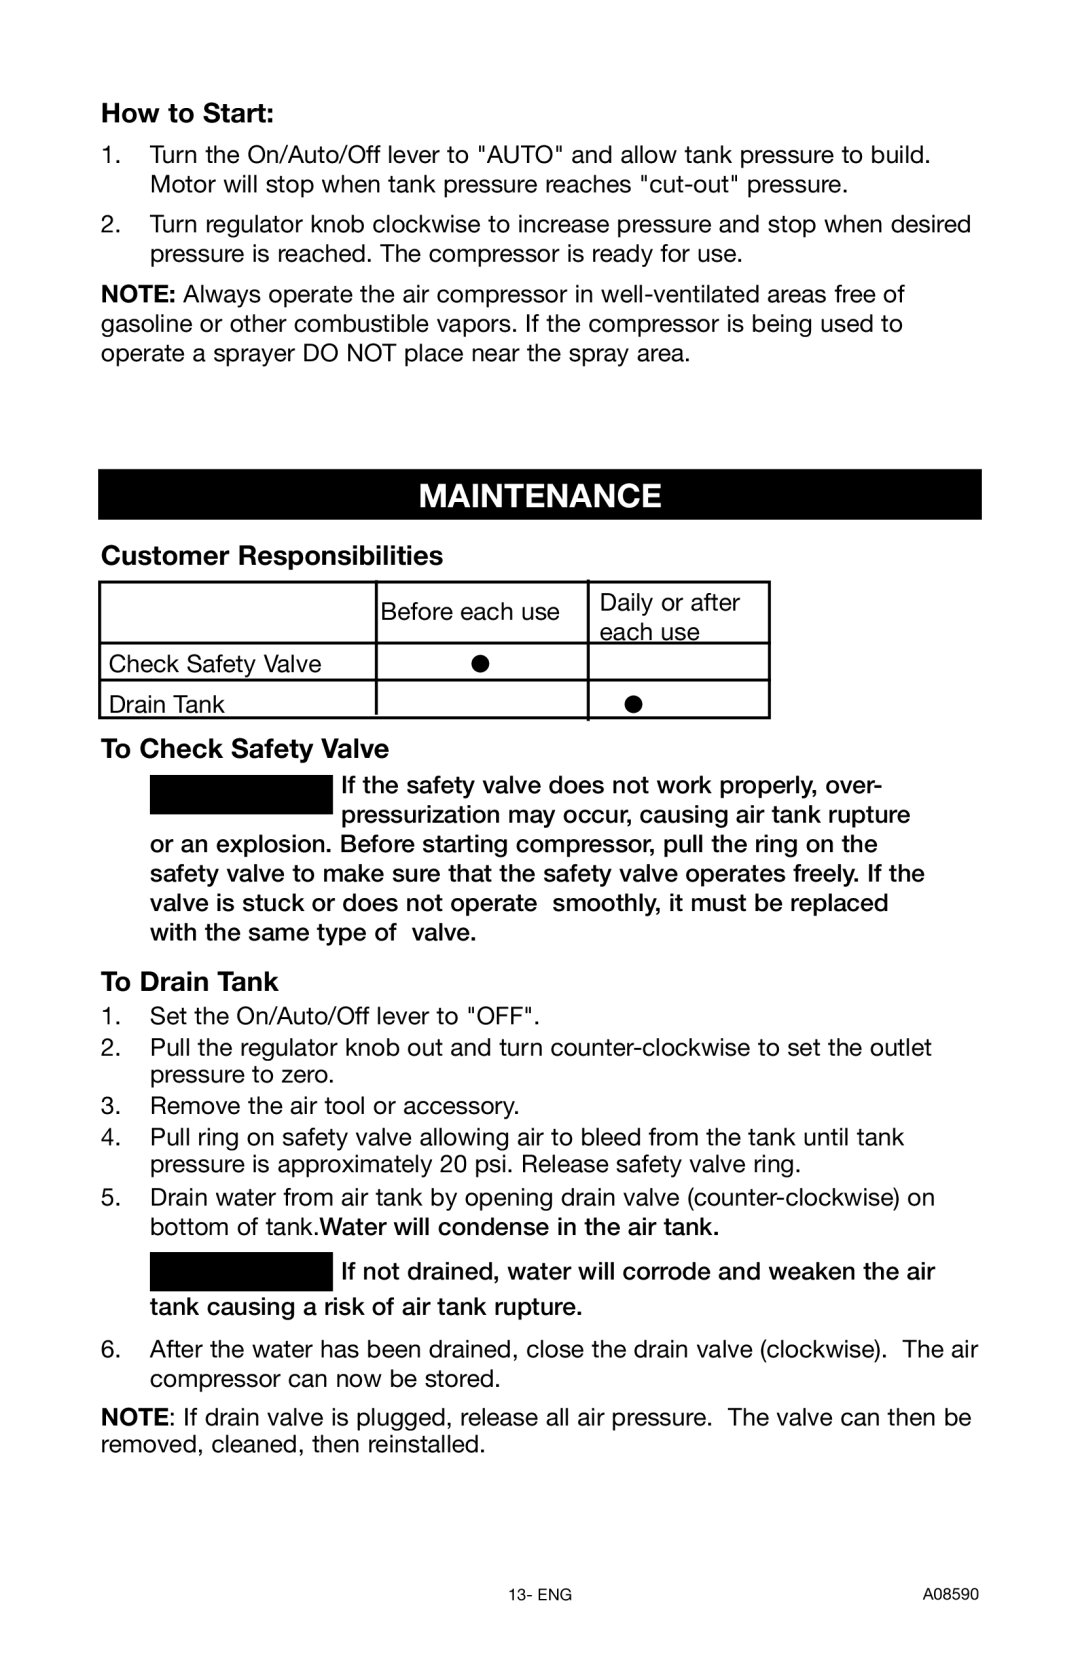 Delta A08590 instruction manual Maintenance, How to Start, Customer Responsibilities, To Check Safety Valve, To Drain Tank 